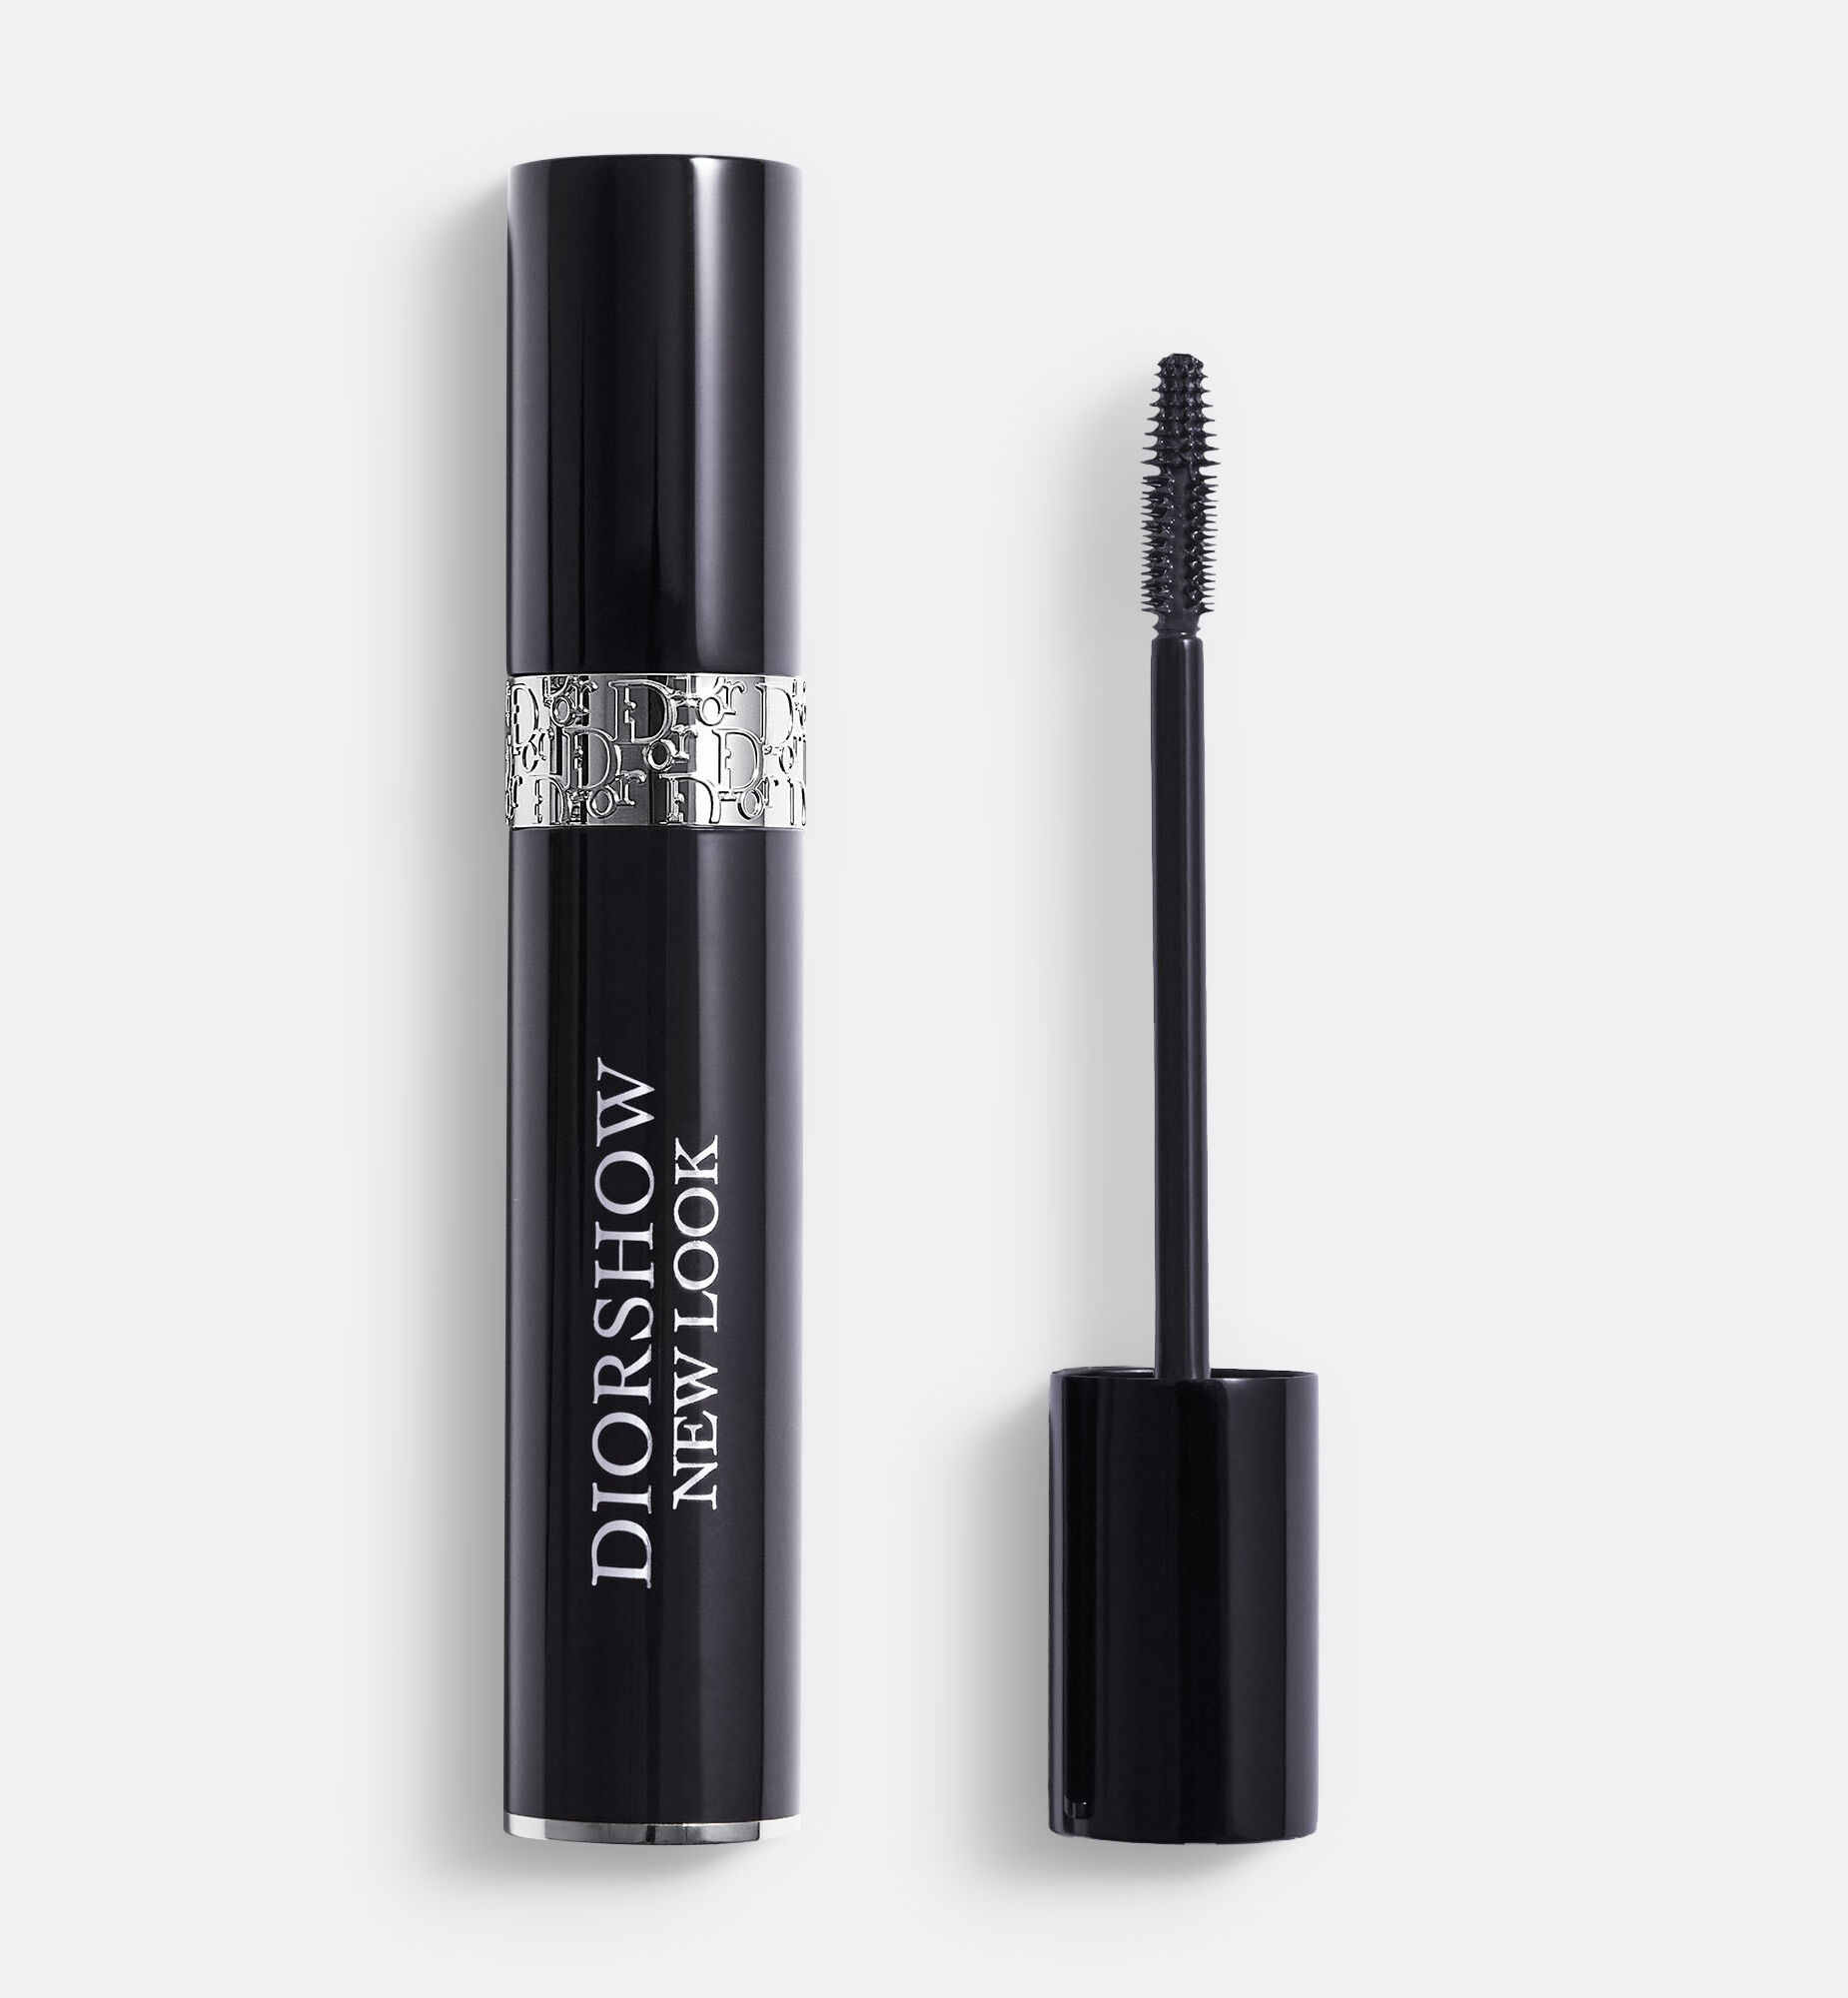 dior ring from mascara  OFF68  Shipping free